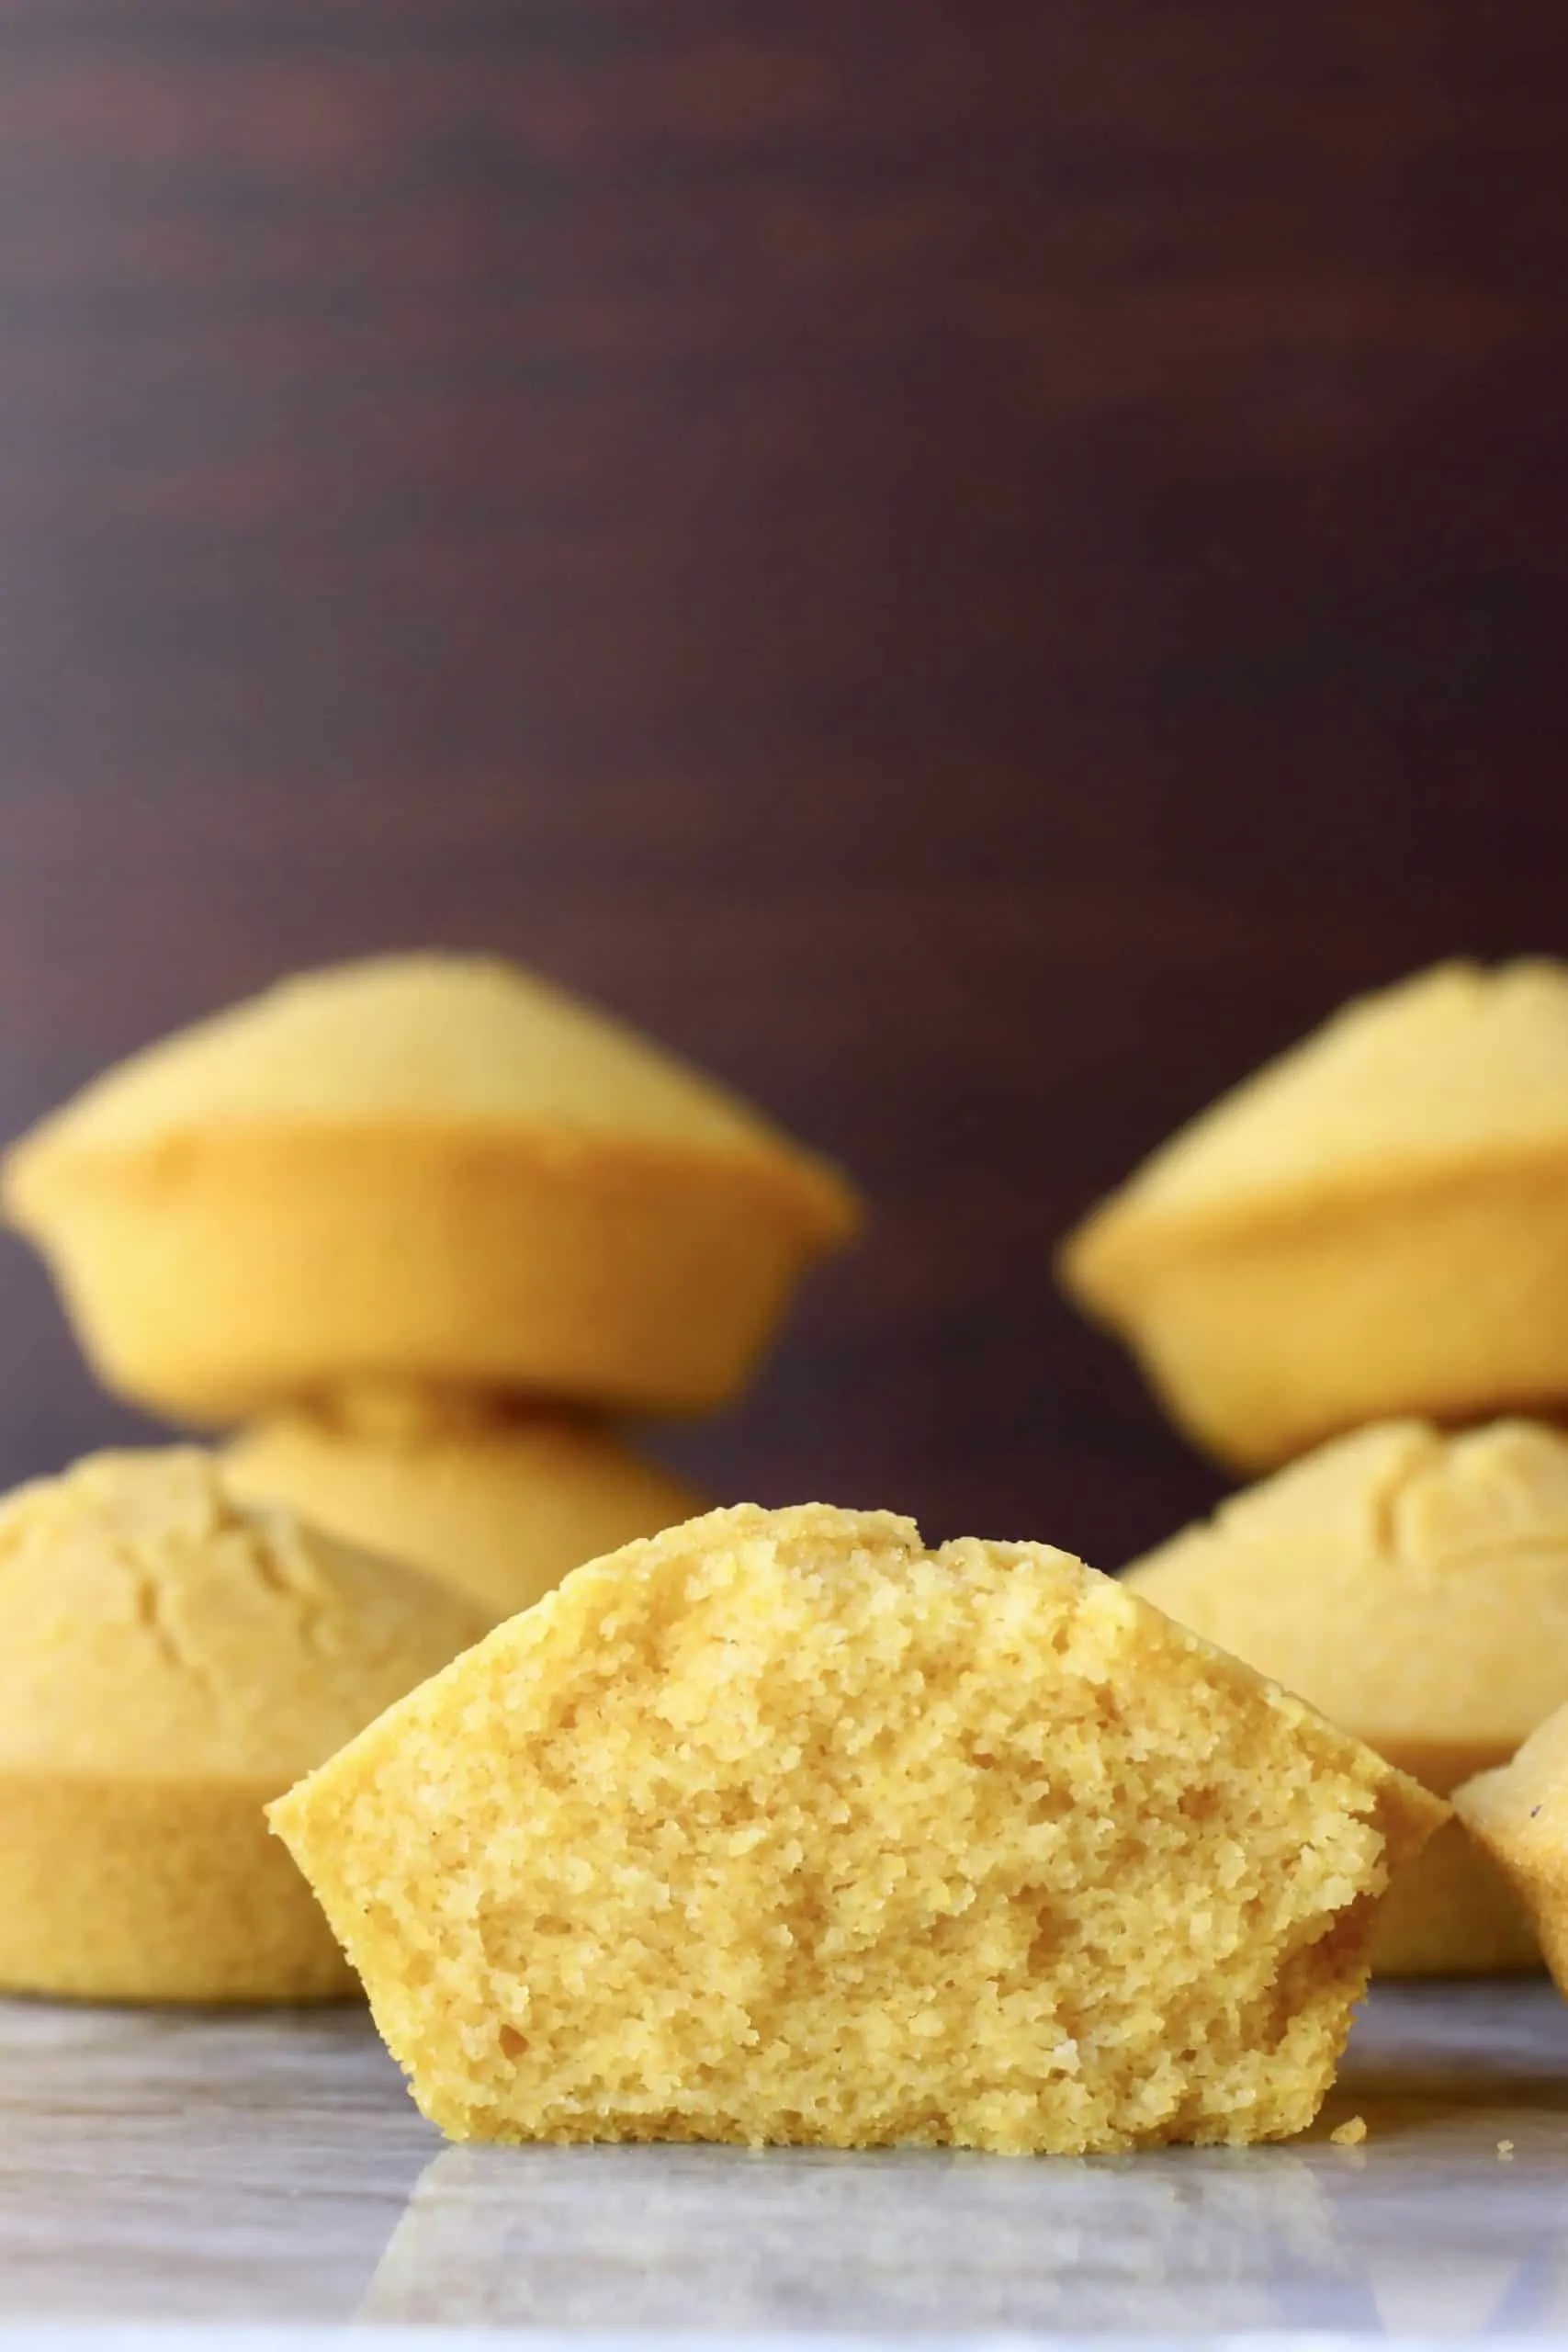 Six cornbread muffins with one cut in half on a marble slab against a dark brown background